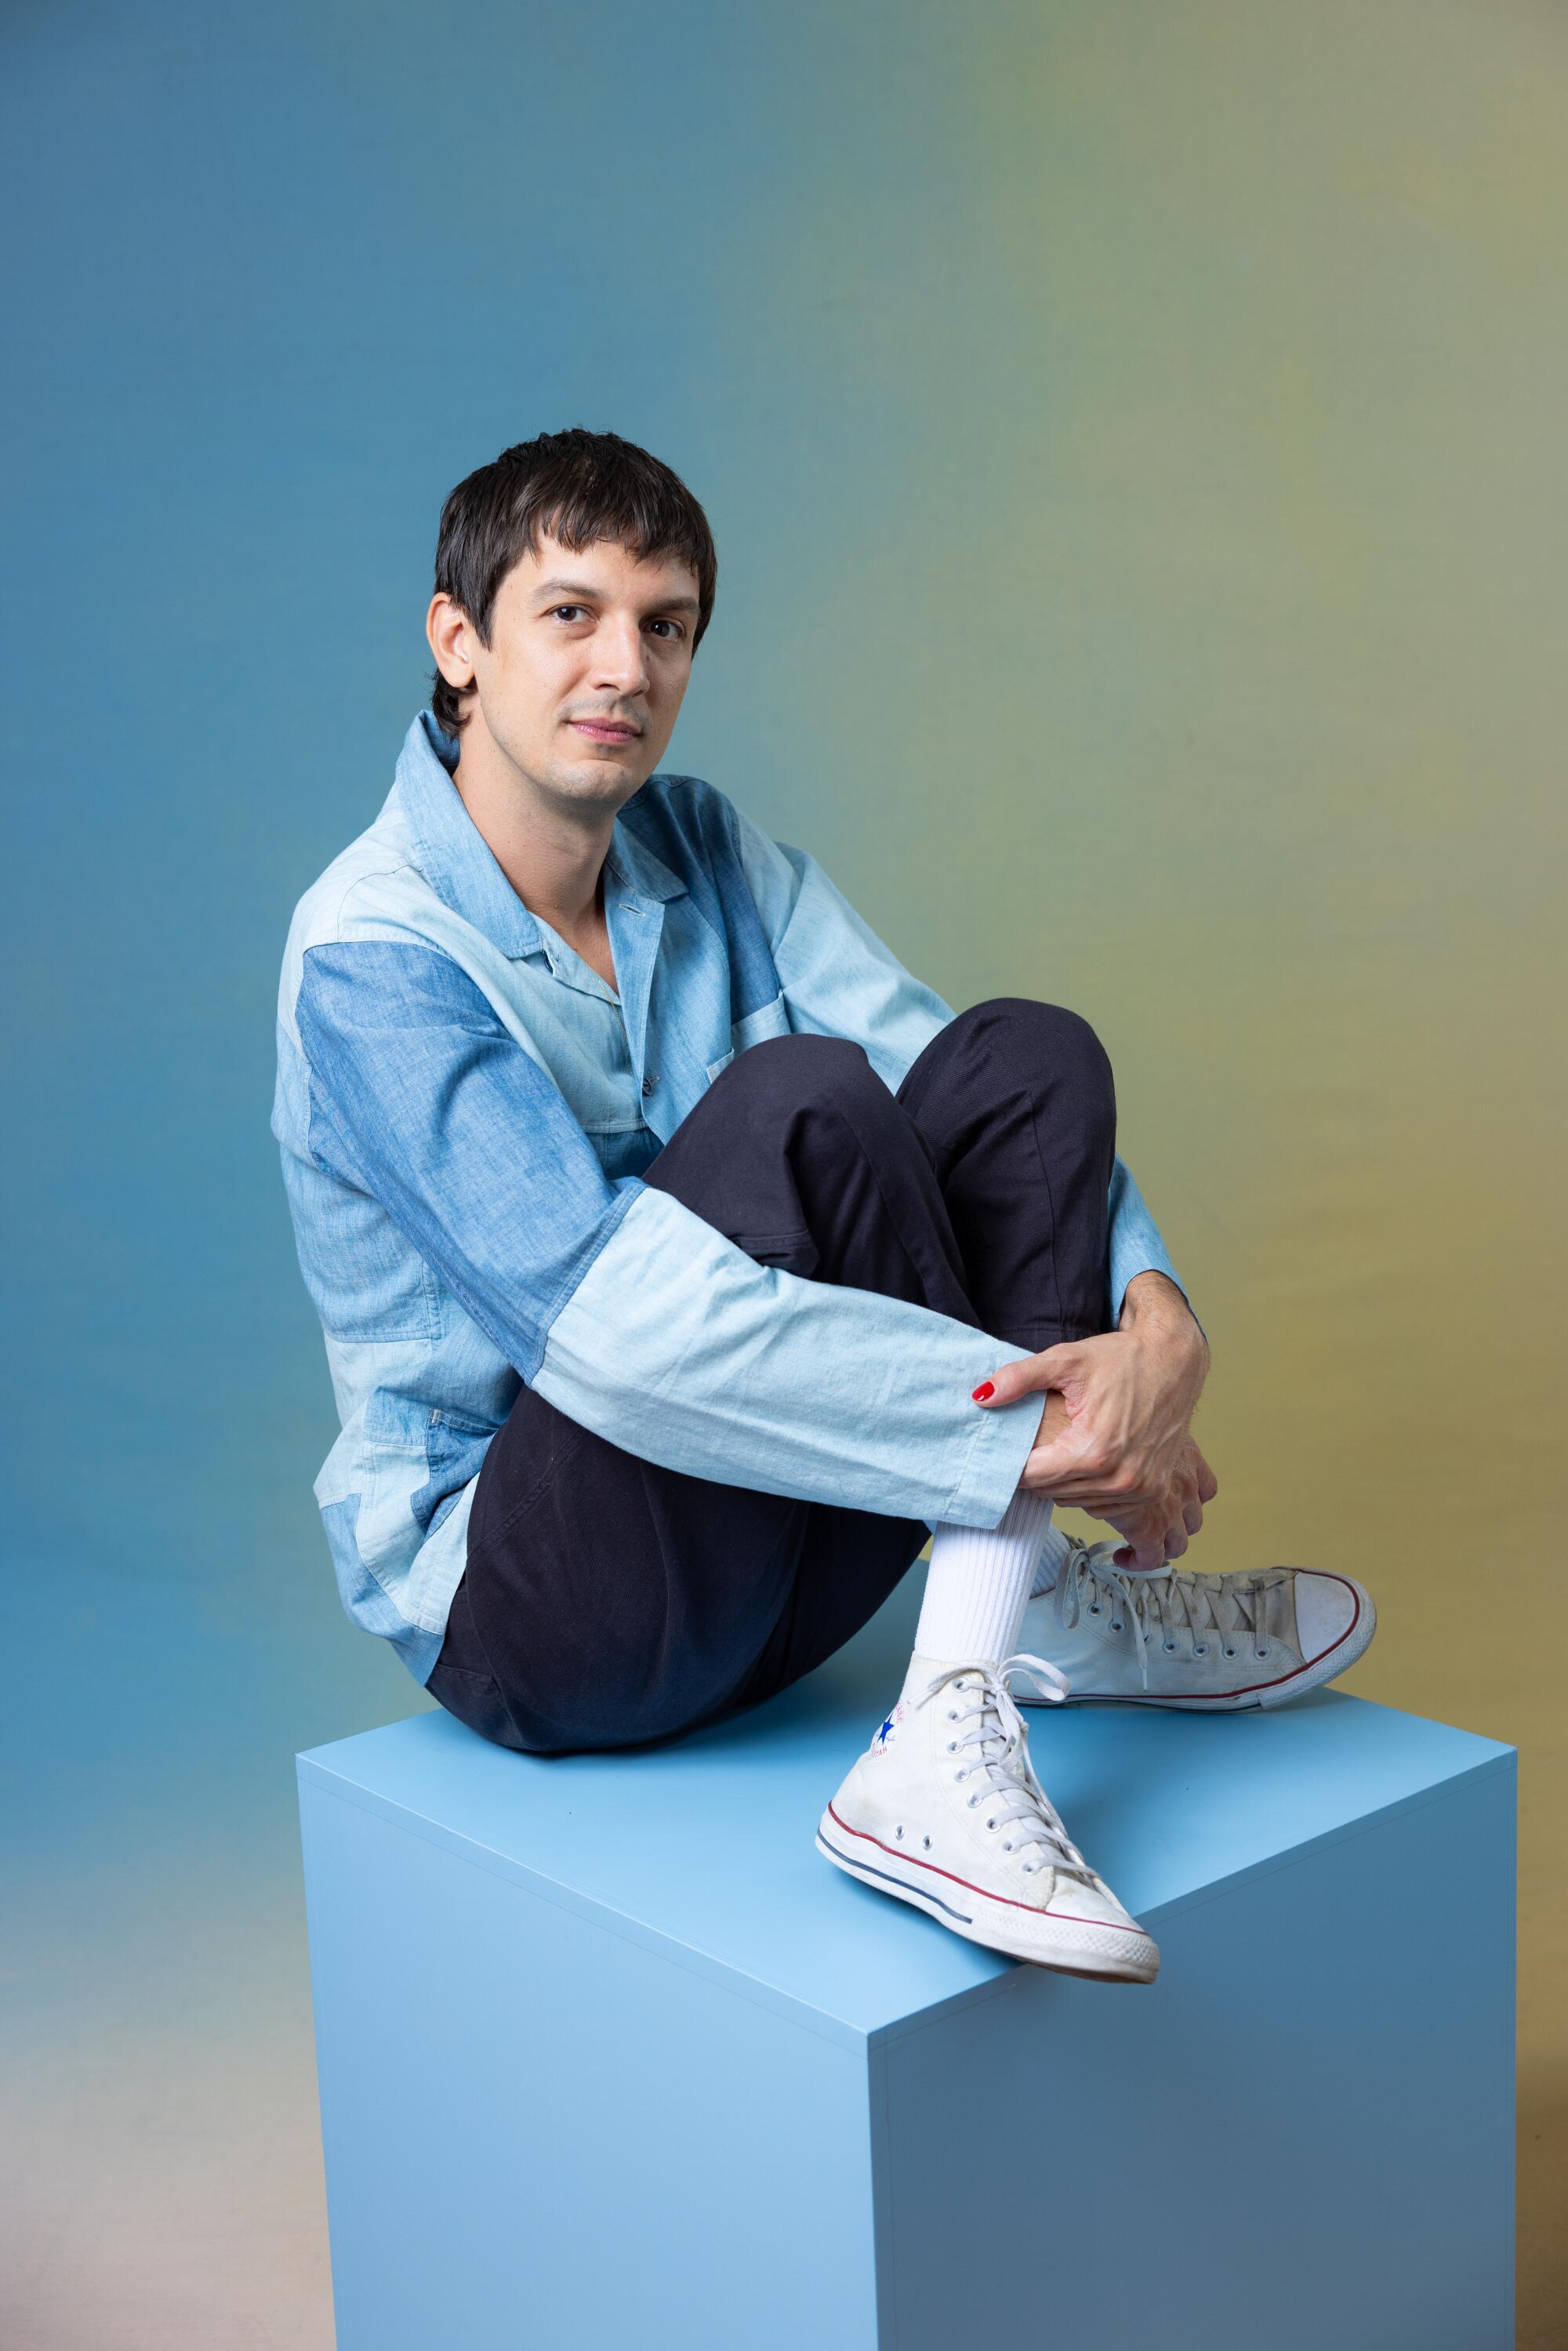 Josh Sharp wears a blue shirt and dark pants while sitting on a blue cube.